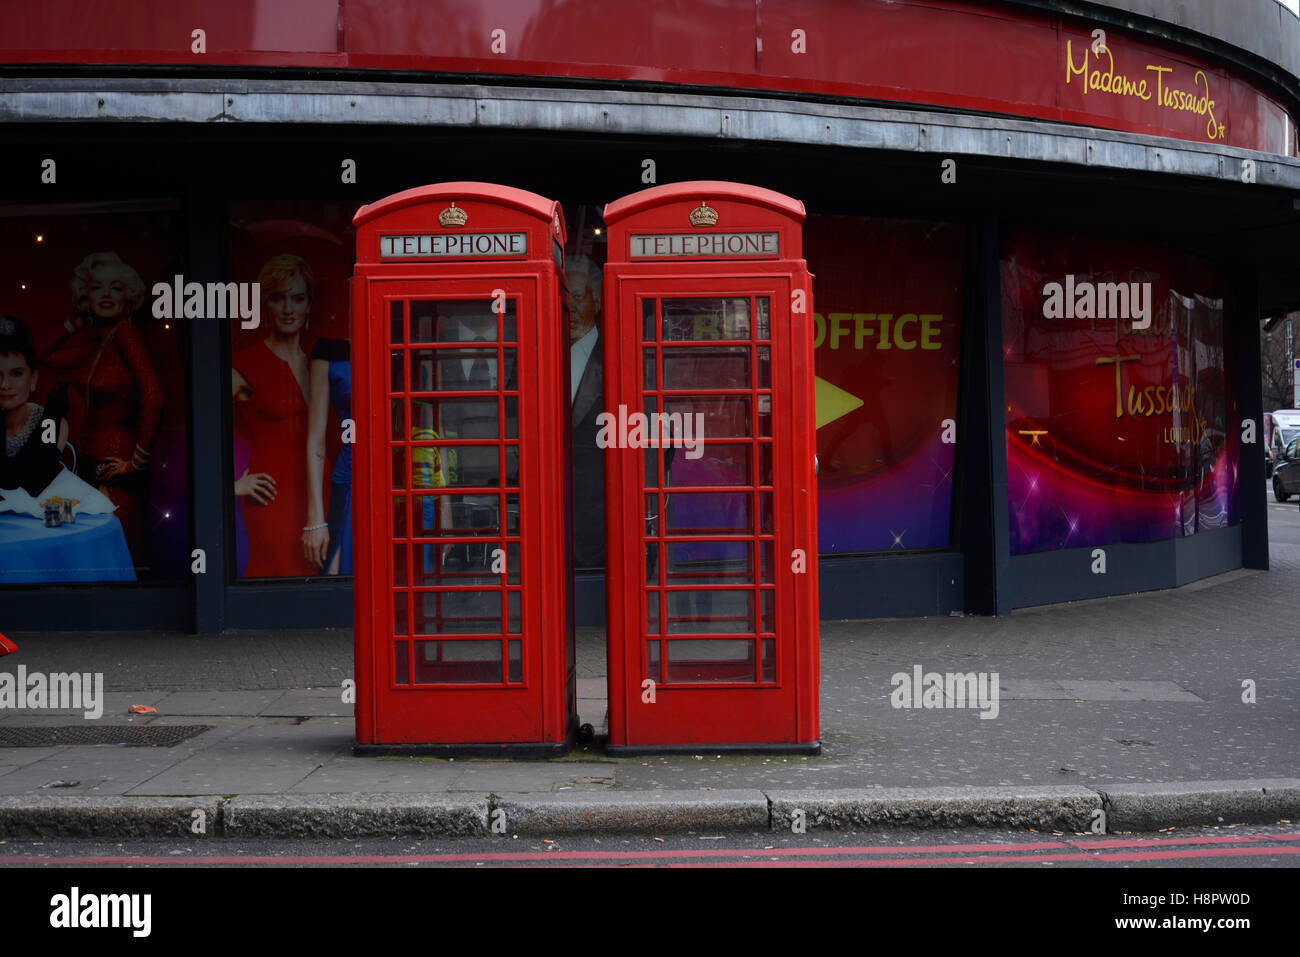 Two Red telephone boxes, Madame Tussaud's museum Stock Photo